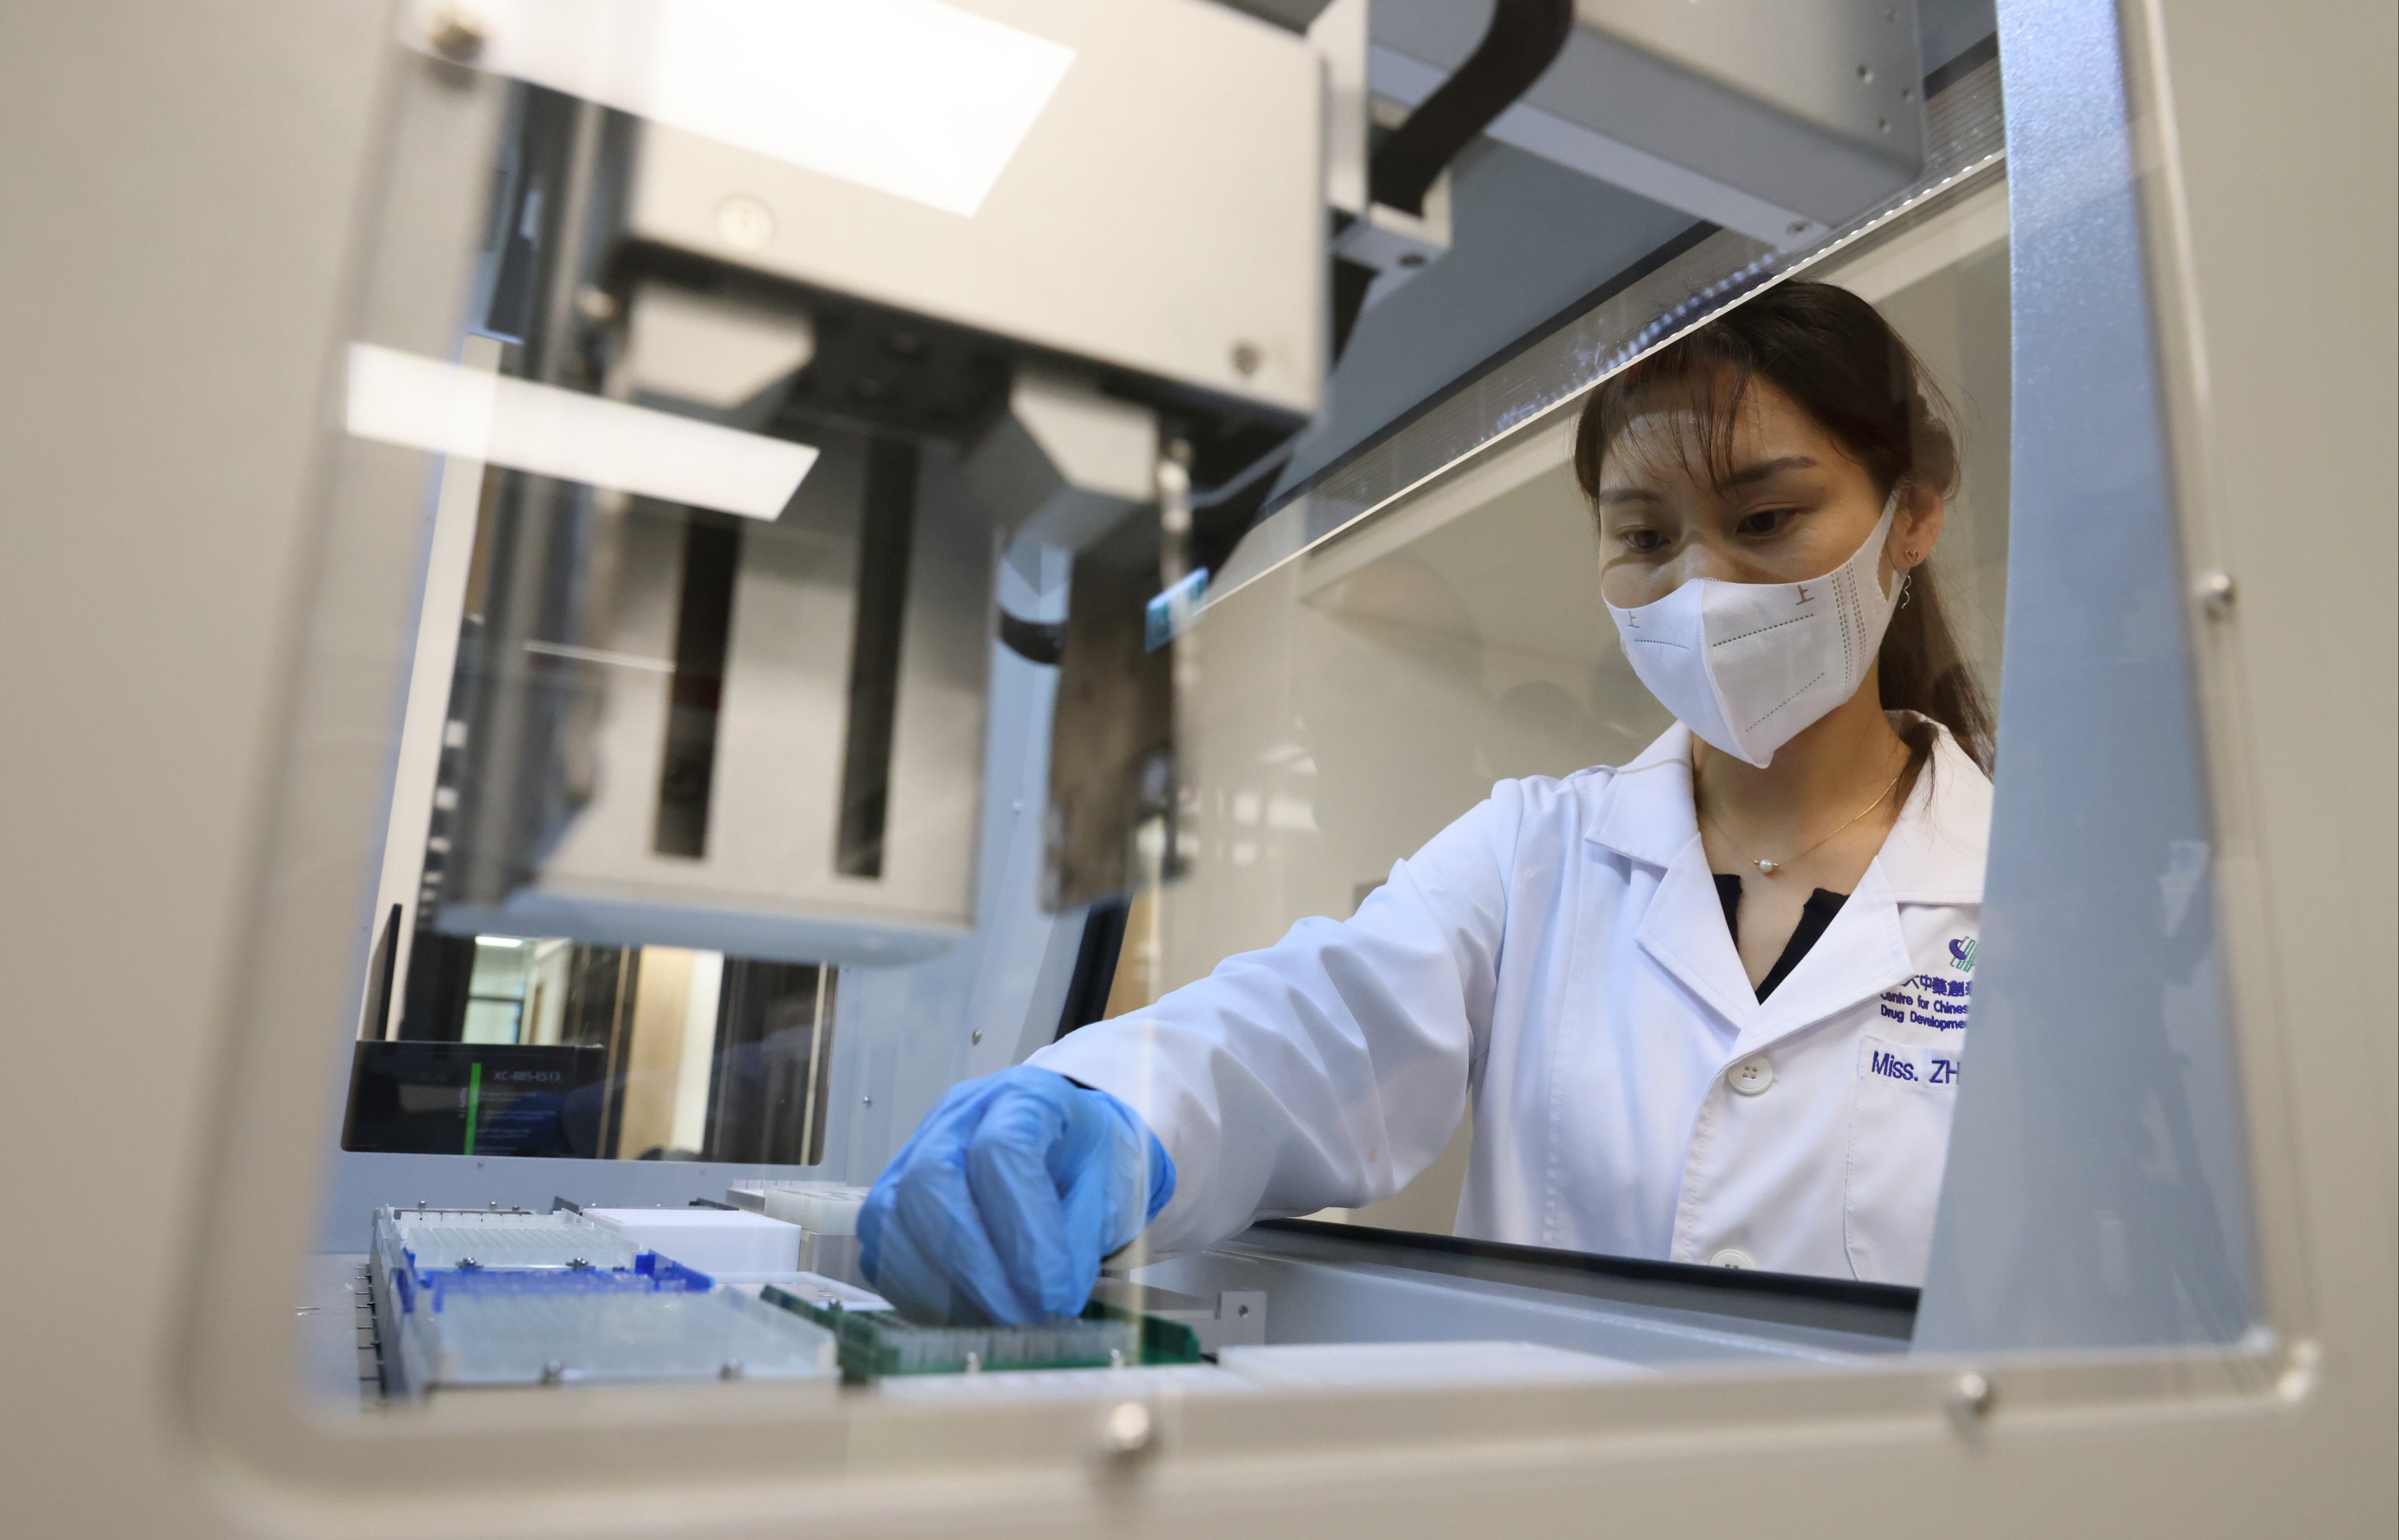 A researcher uses automated equipment for high-throughput screening, a process which allows for the mass testing of chemicals, at the Centre for Chinese Herbal Medicine Drug Development, at Hong Kong Science Park, on December 22, 2021. Photo: Dickson Lee